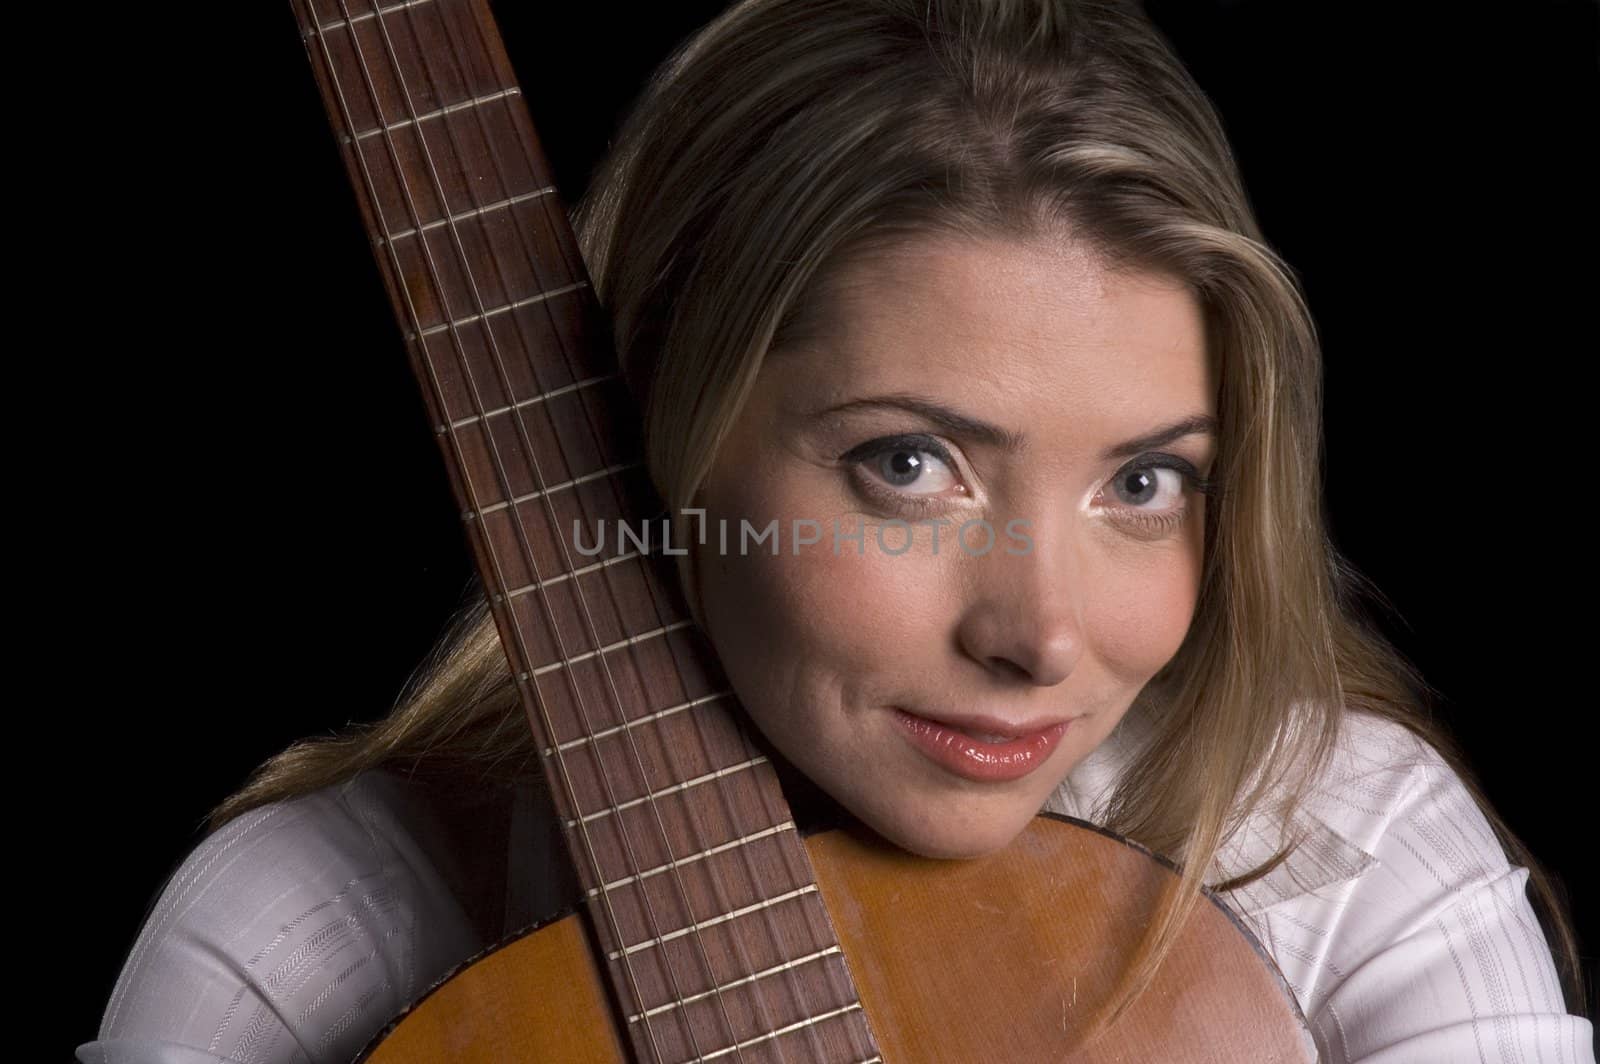 Attractive smiling female guitarist leaning on guitar thinking over a black background